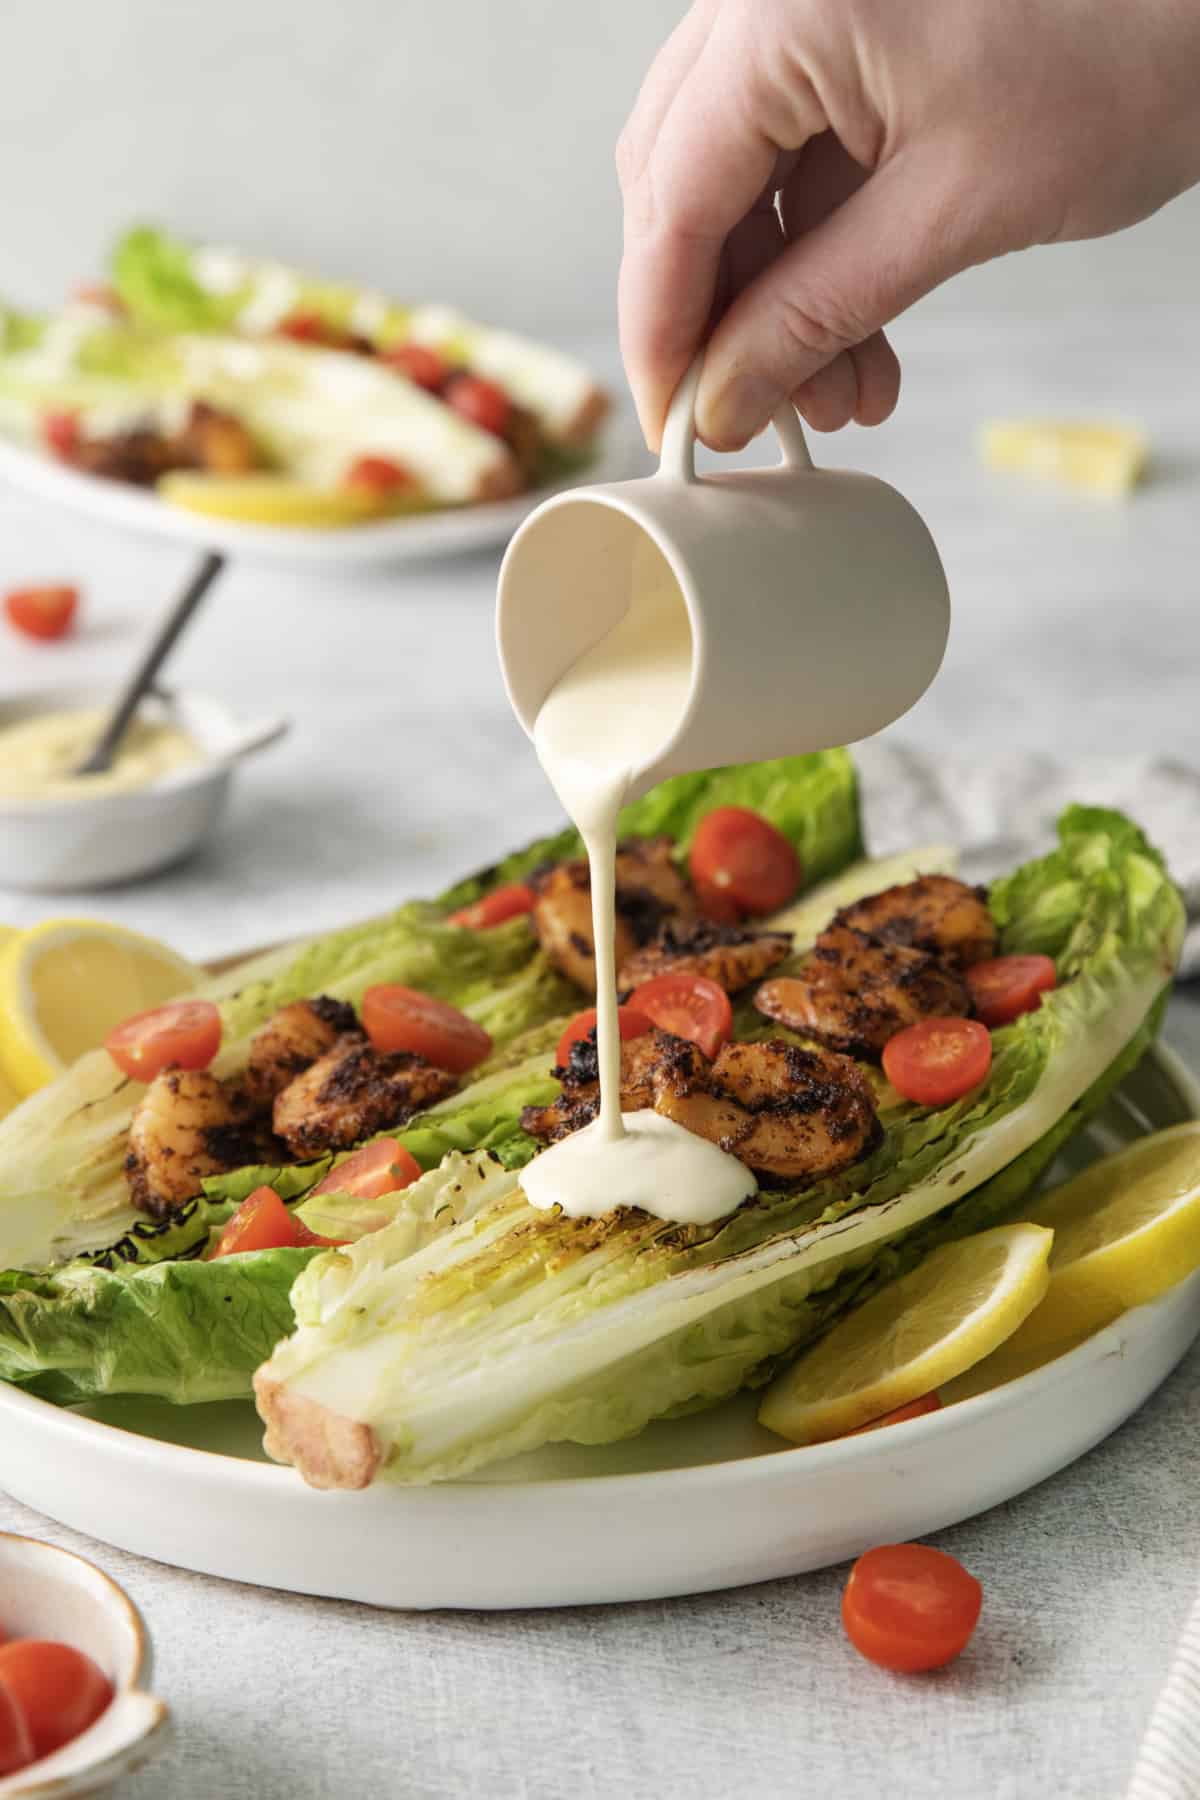 caesar dressing being drizzled over a grilled salad.